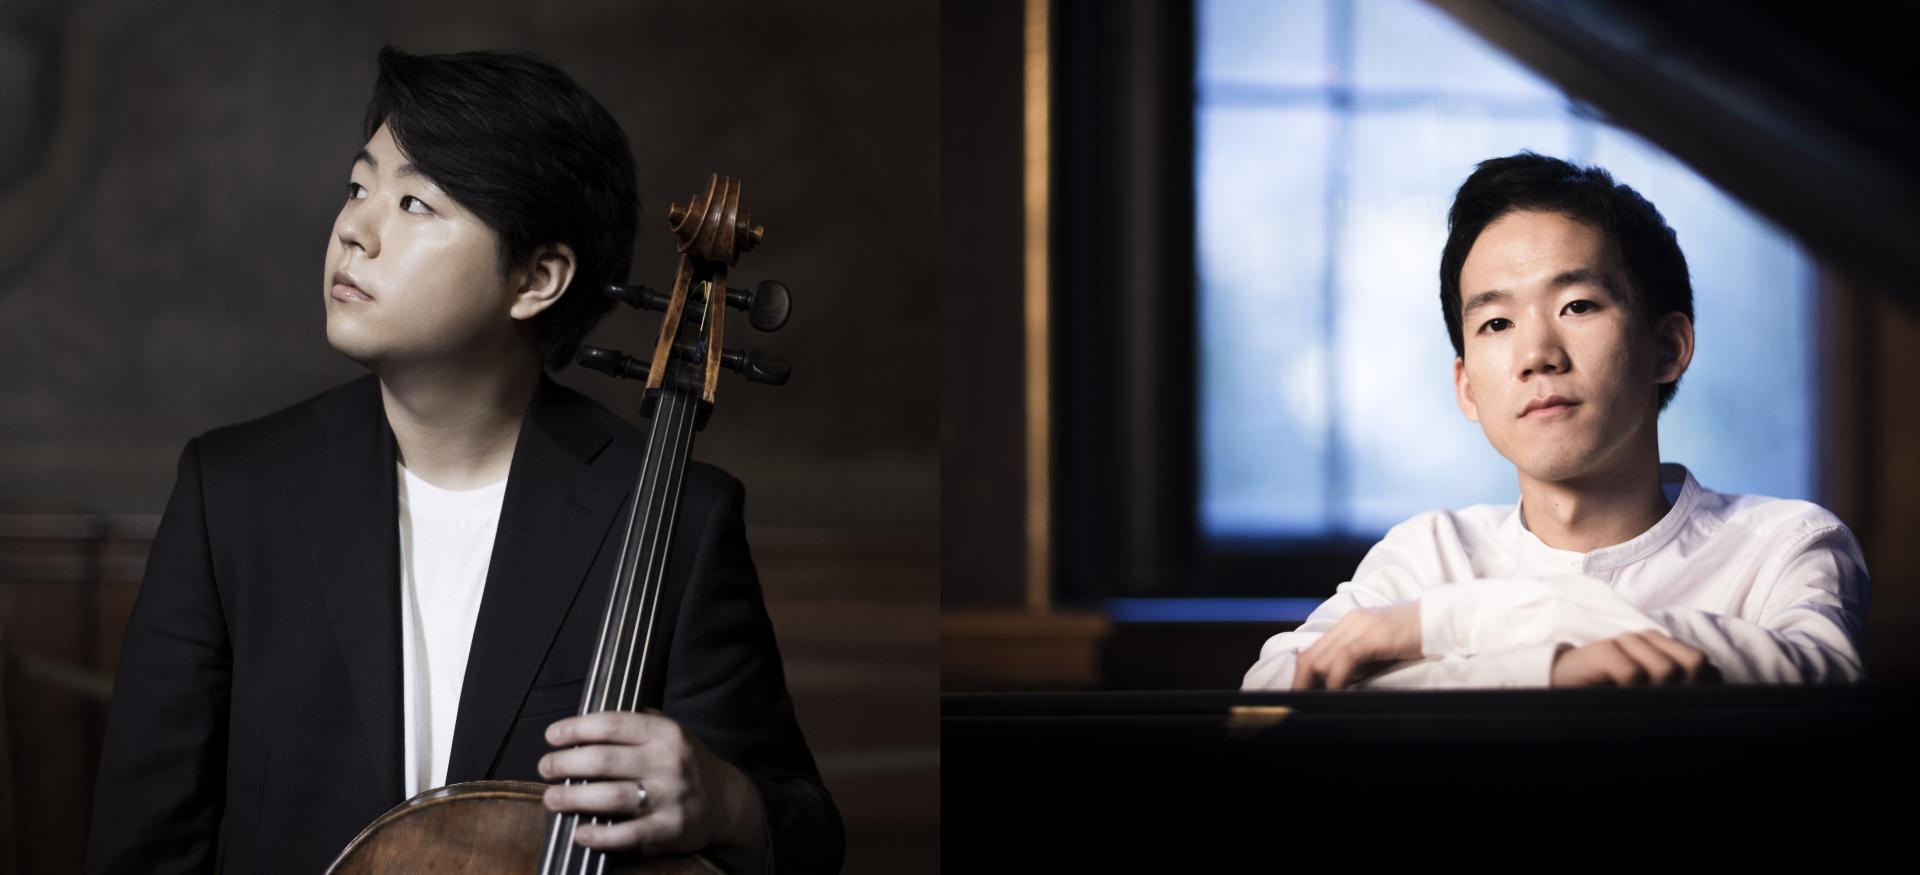 Side by side images of Waynne Kwon at a piano and Victor Lim.